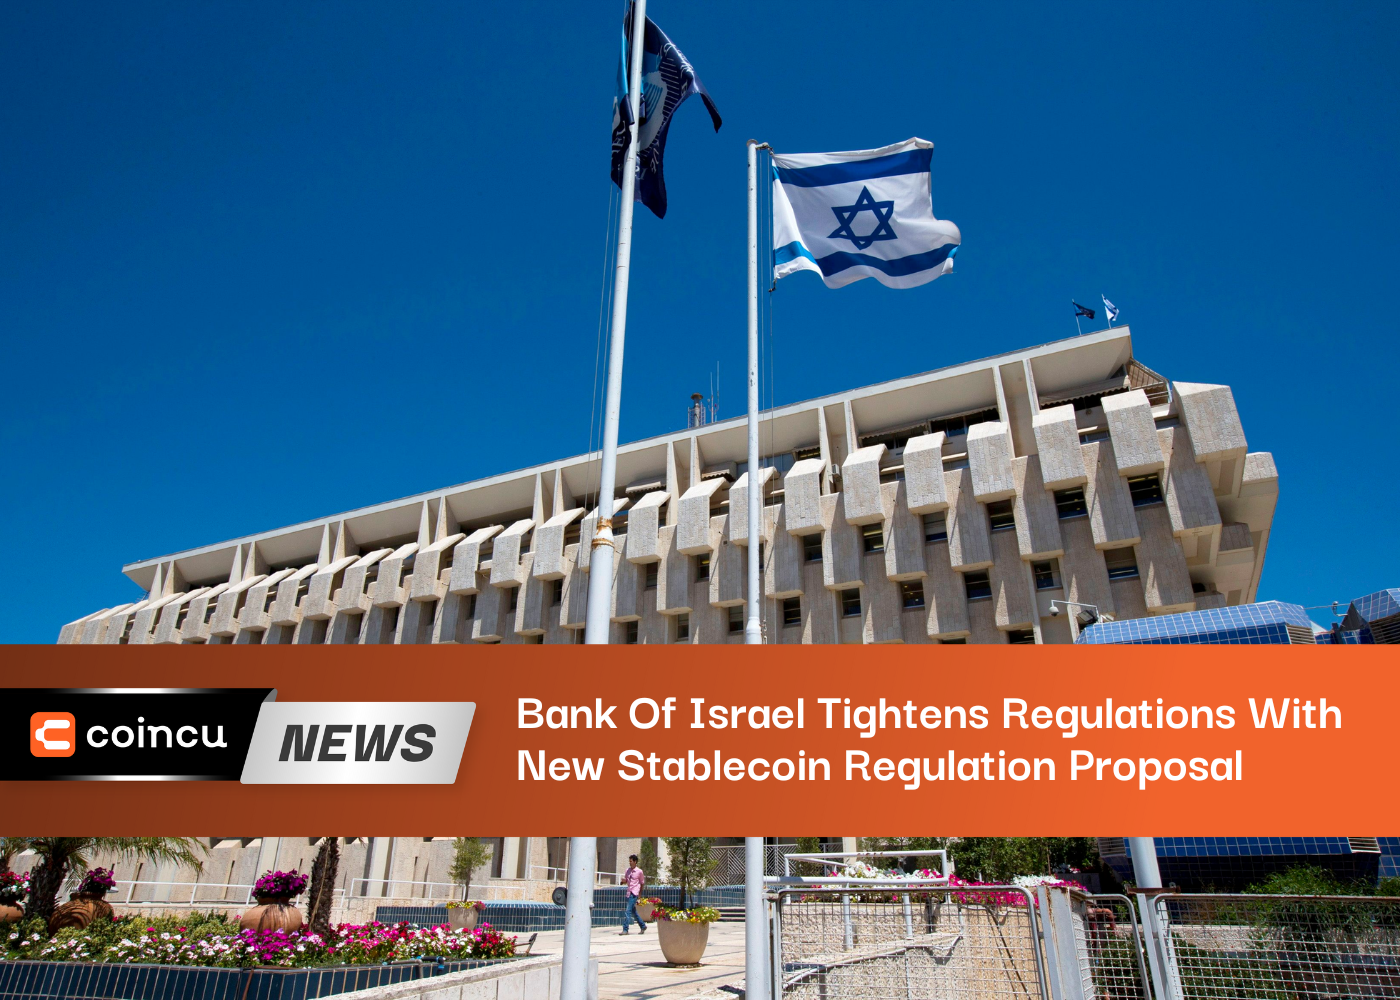 Bank Of Israel Tightens Regulations With New Stablecoin Regulation Proposal